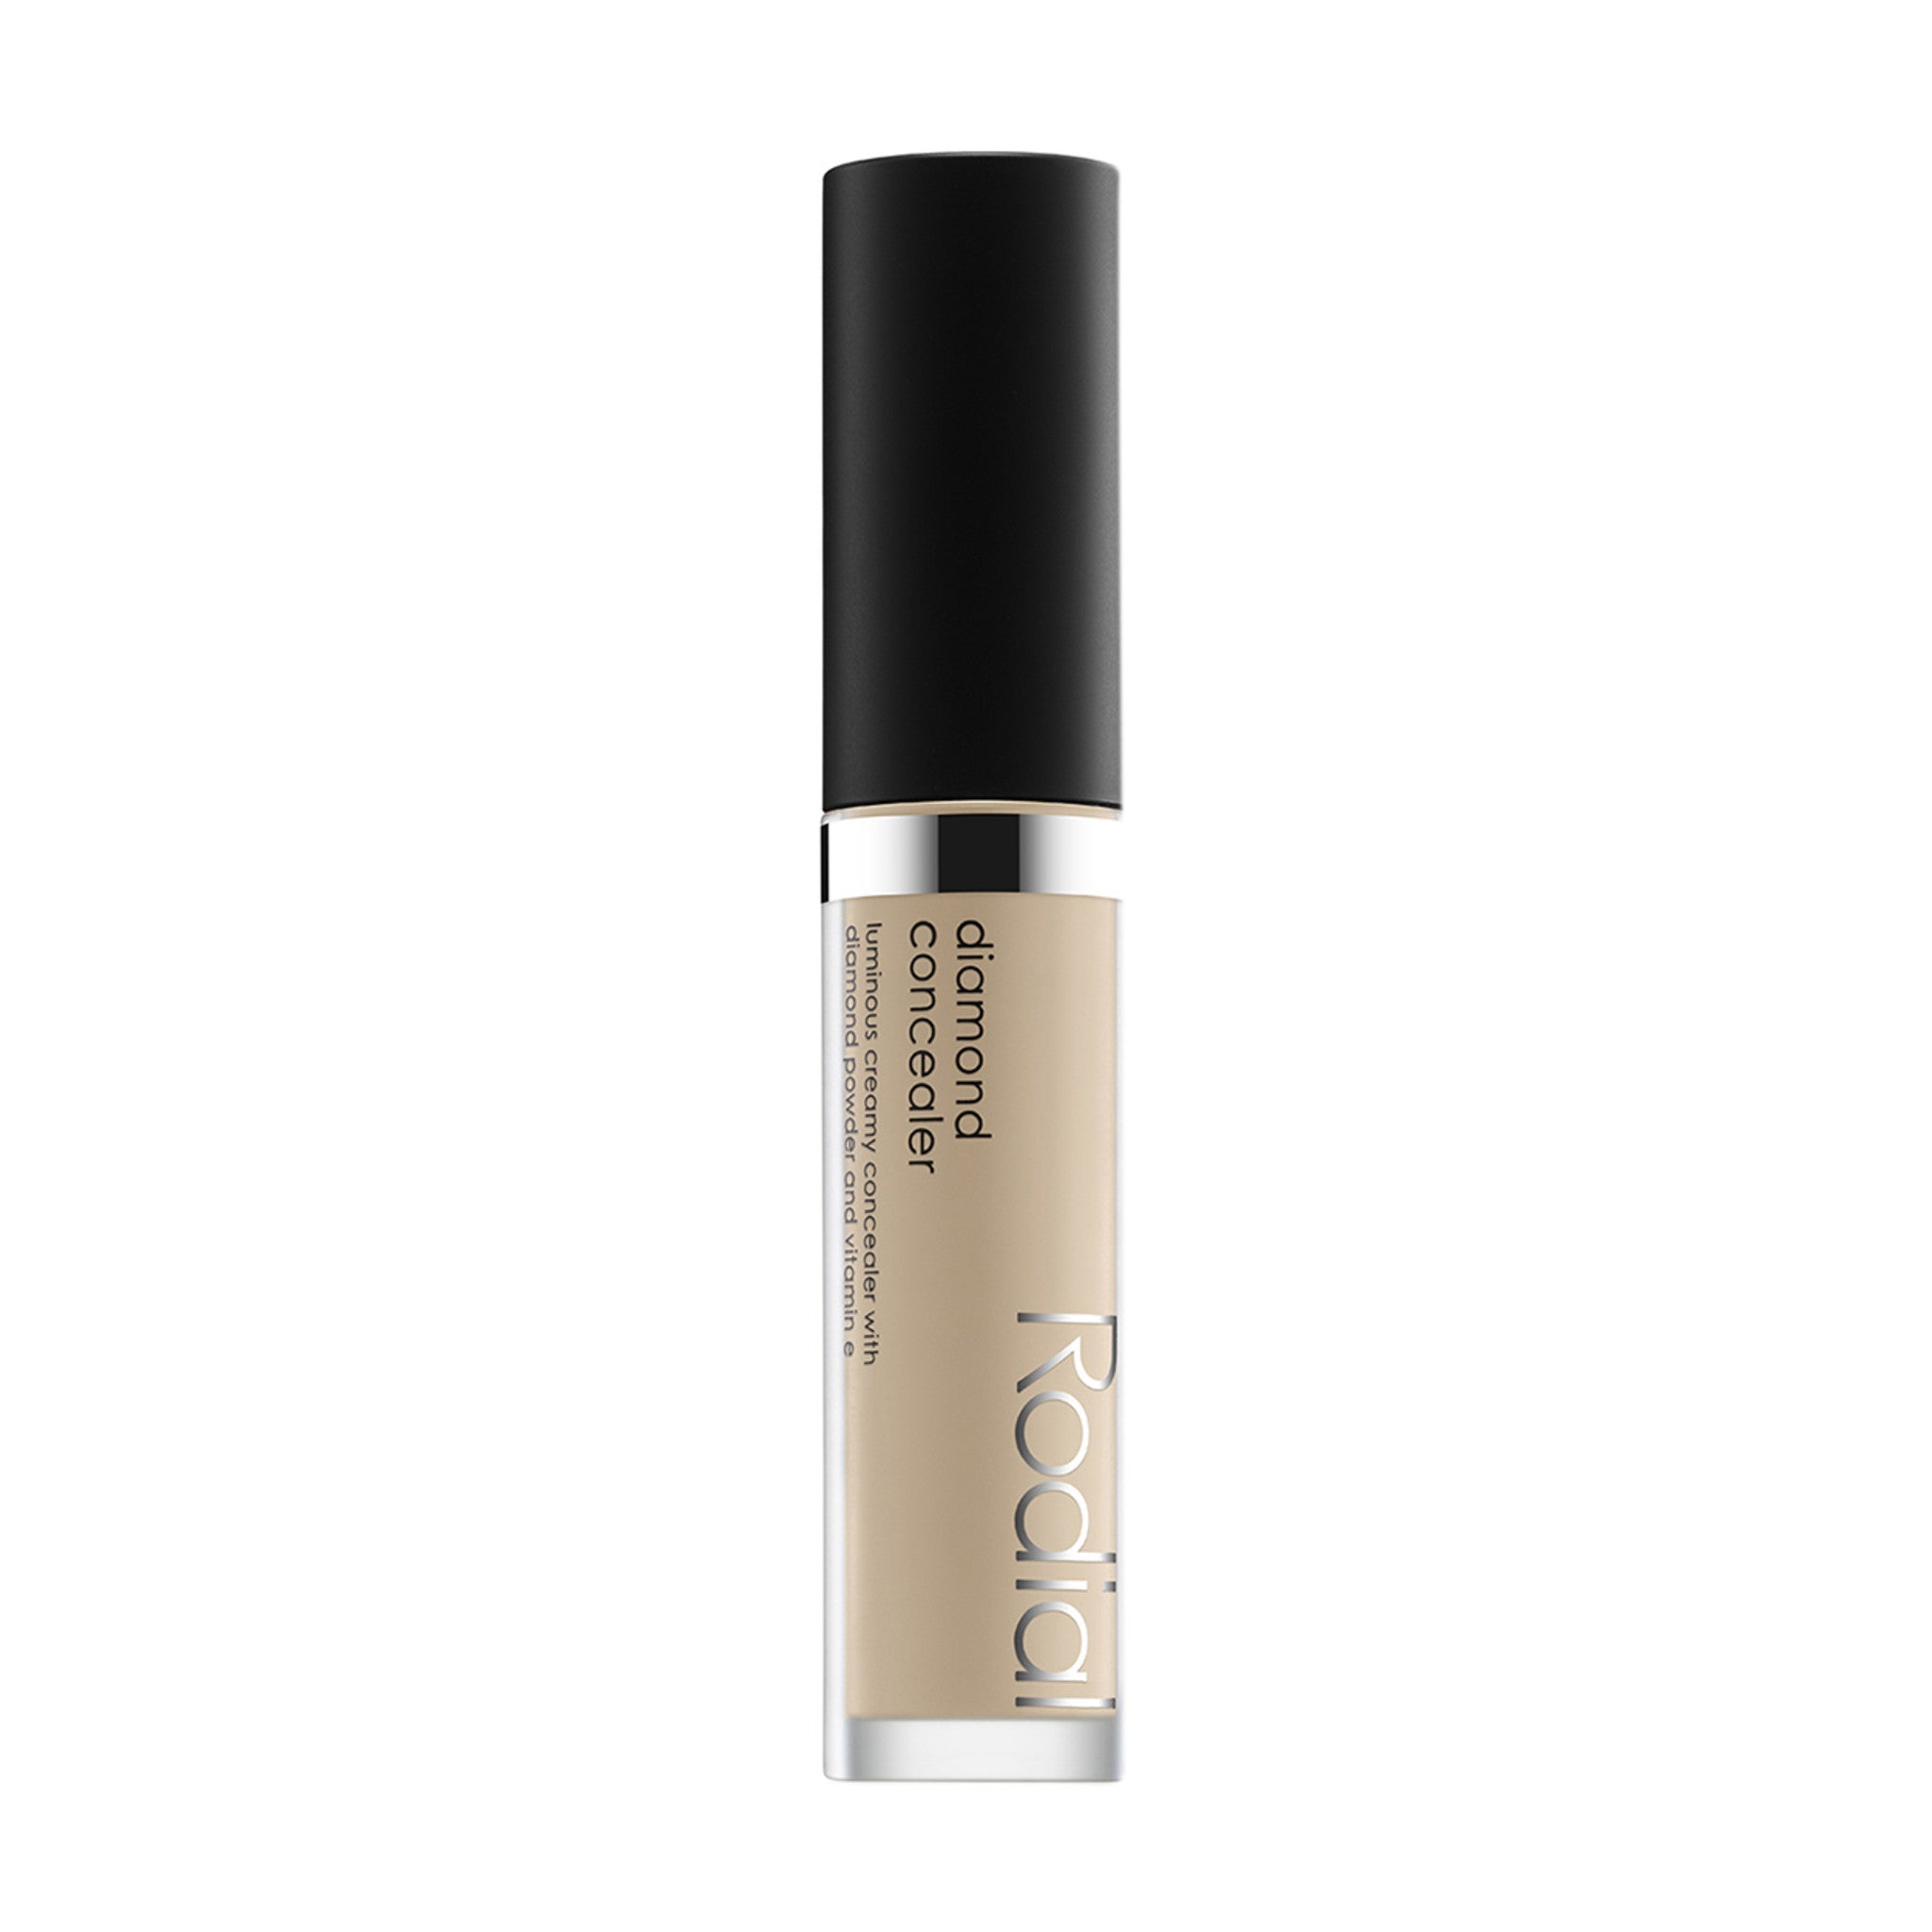 Rodial Diamond Liquid Concealer Color/Shade variant: SHADE 20 main image. This product is for light warm neutral beige complexions